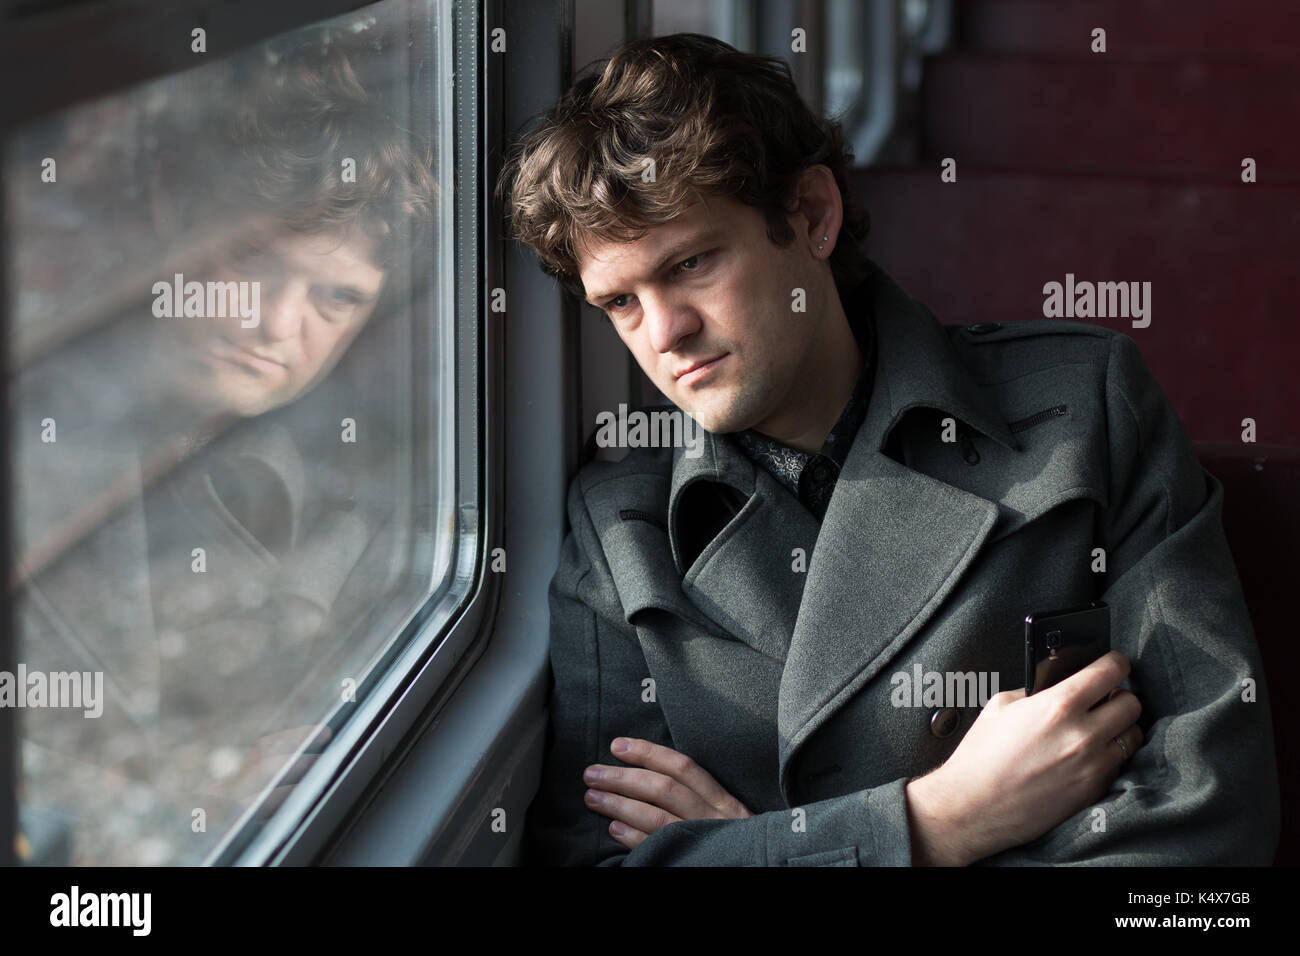 Traveling by train. Sad man traveling by train, looking through the window and thinking about unrequited love squeezing the phone in his hand. alone in an empty train wagon. Real people series. Stock Photo